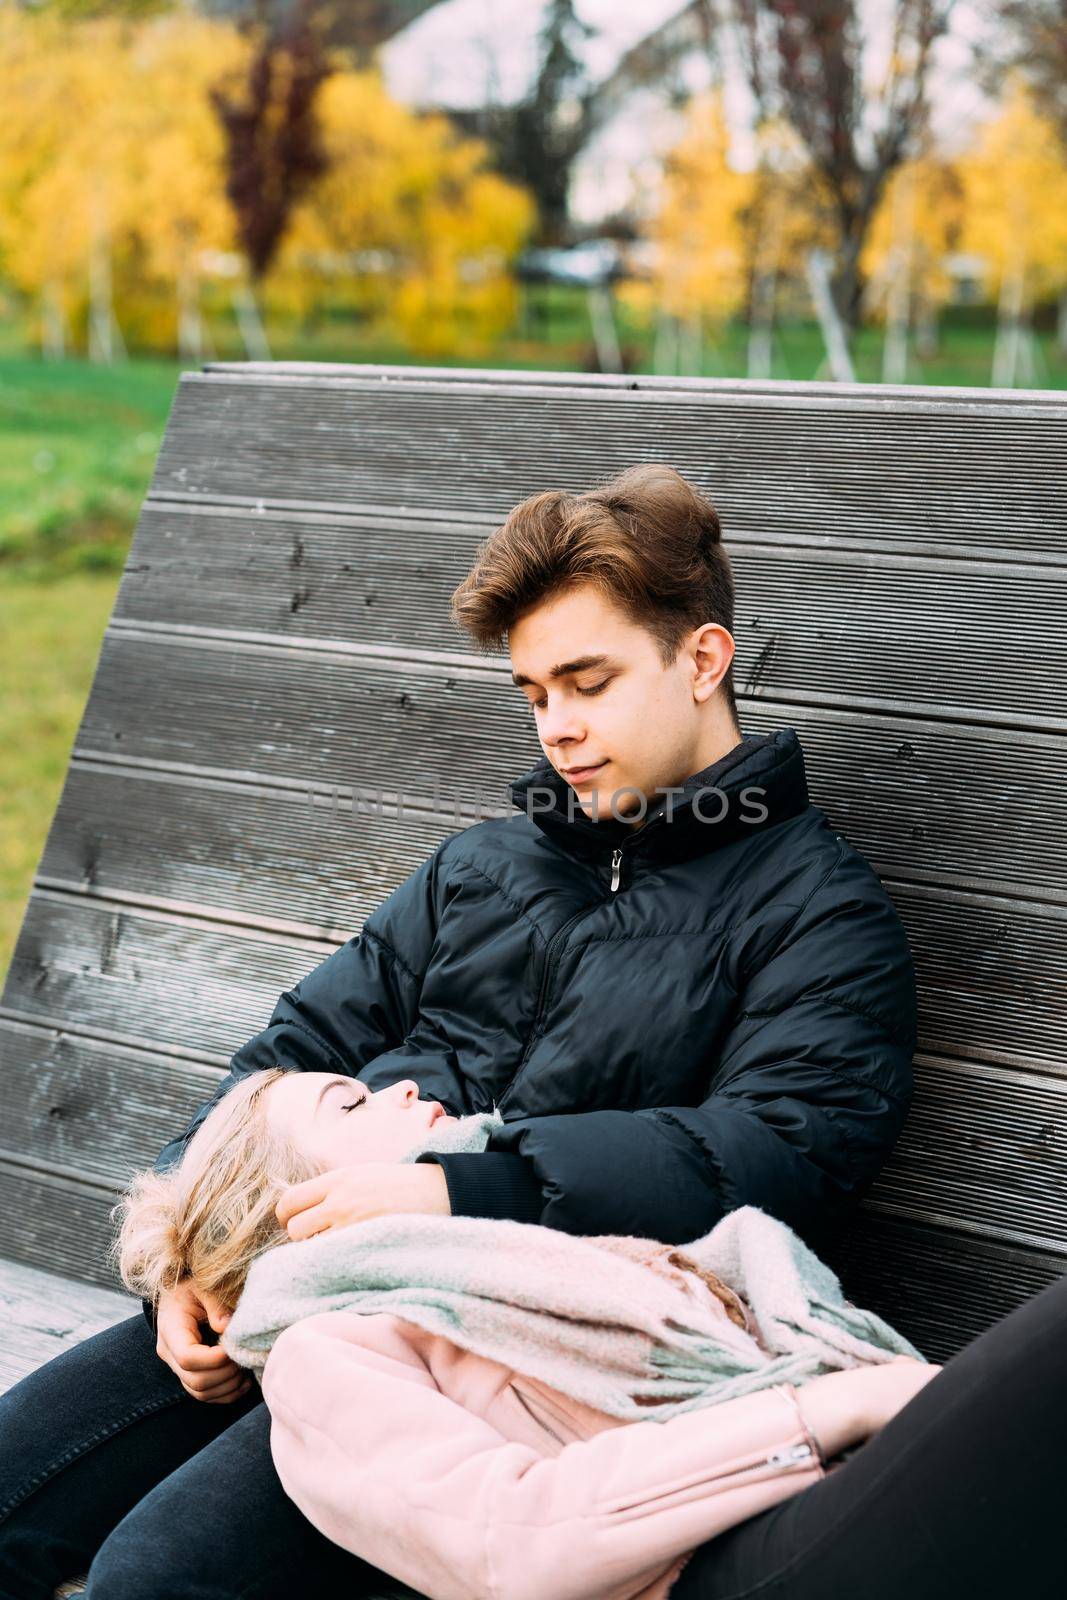 Teenagers in love are sitting on park bench in autumn, chatting cheerfully, talking. Cute blonde girl lies, her head on boy lap. Teenage love concept, vertical